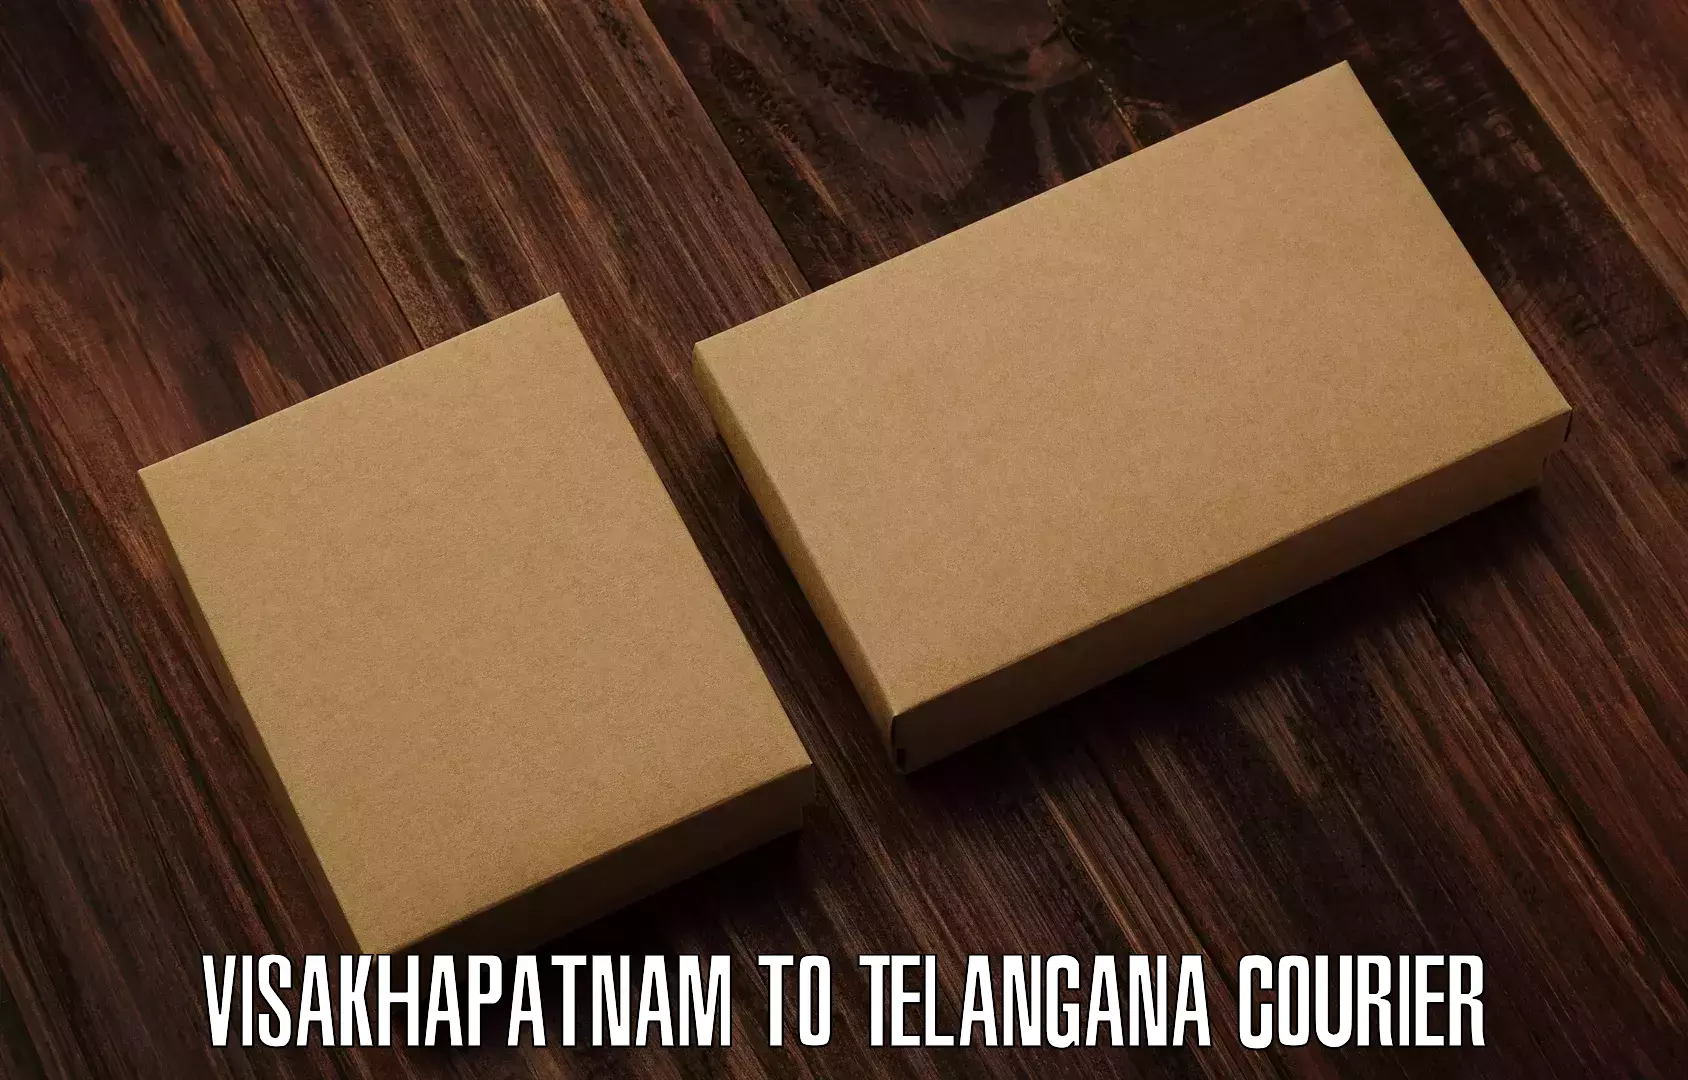 Courier service partnerships Visakhapatnam to Bodhan